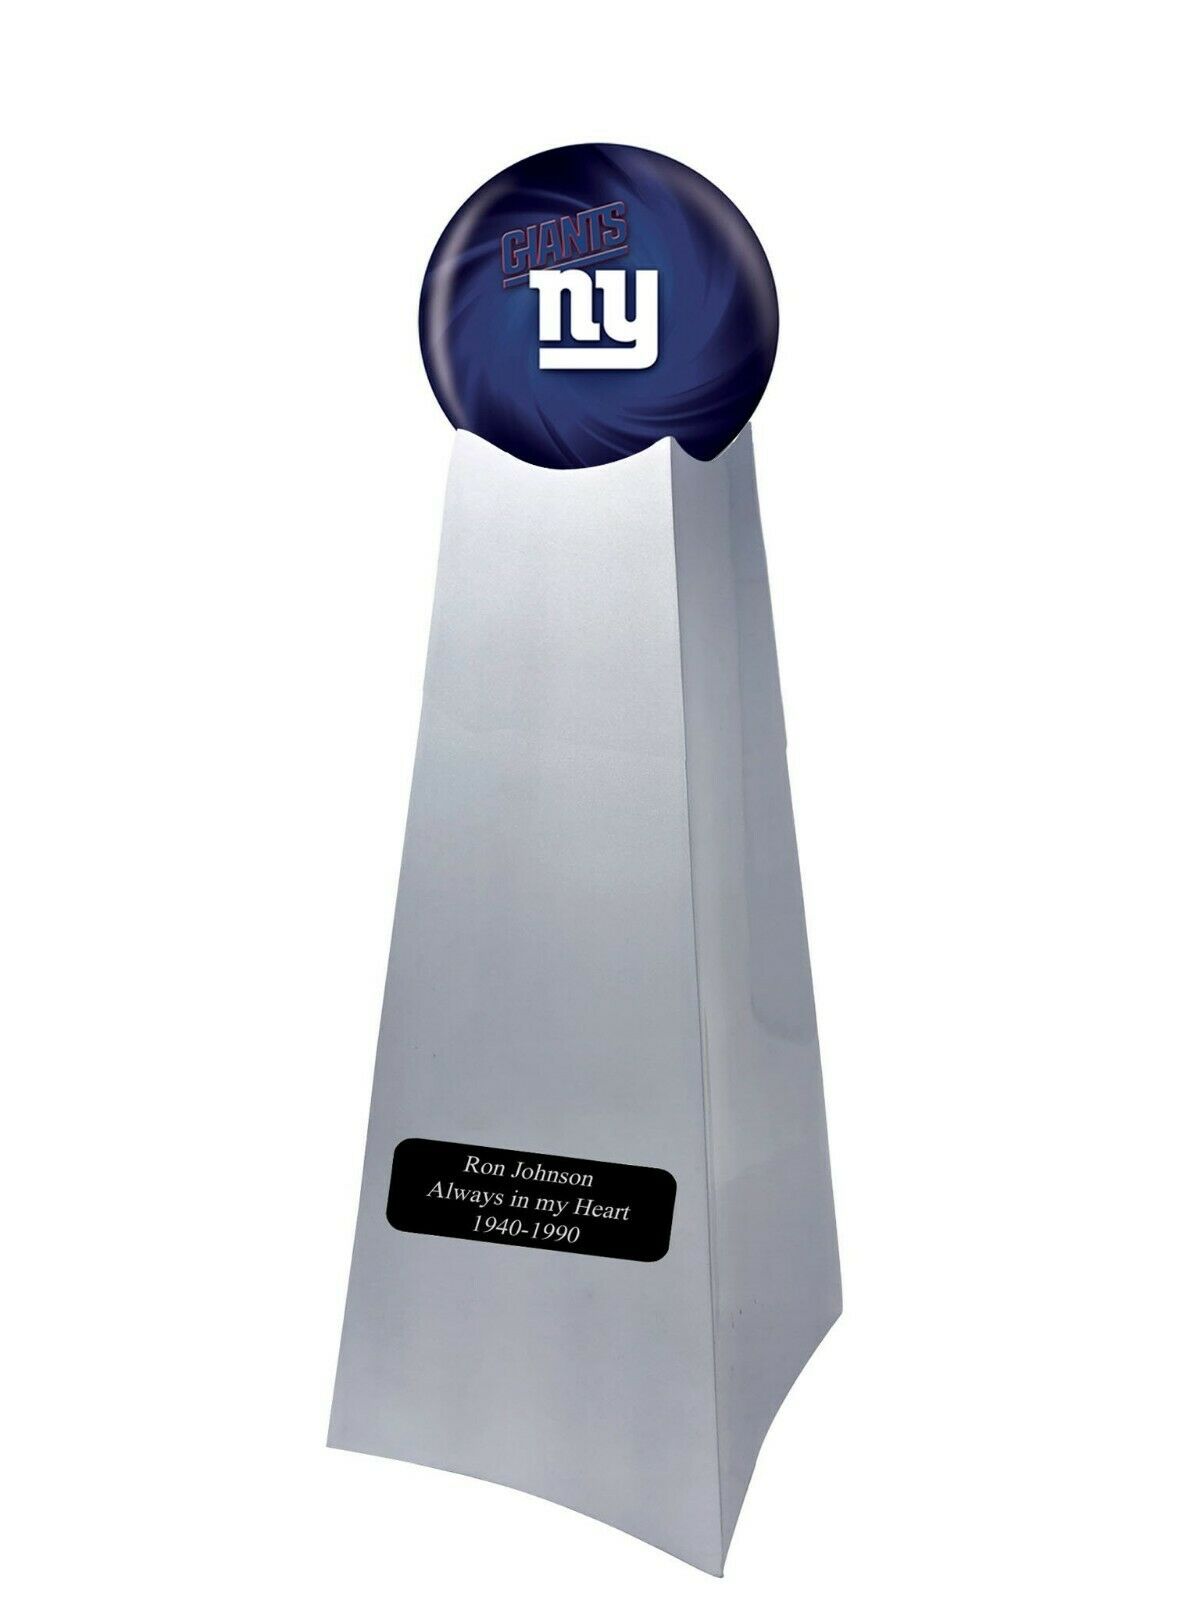 200+] New York Giants Pictures